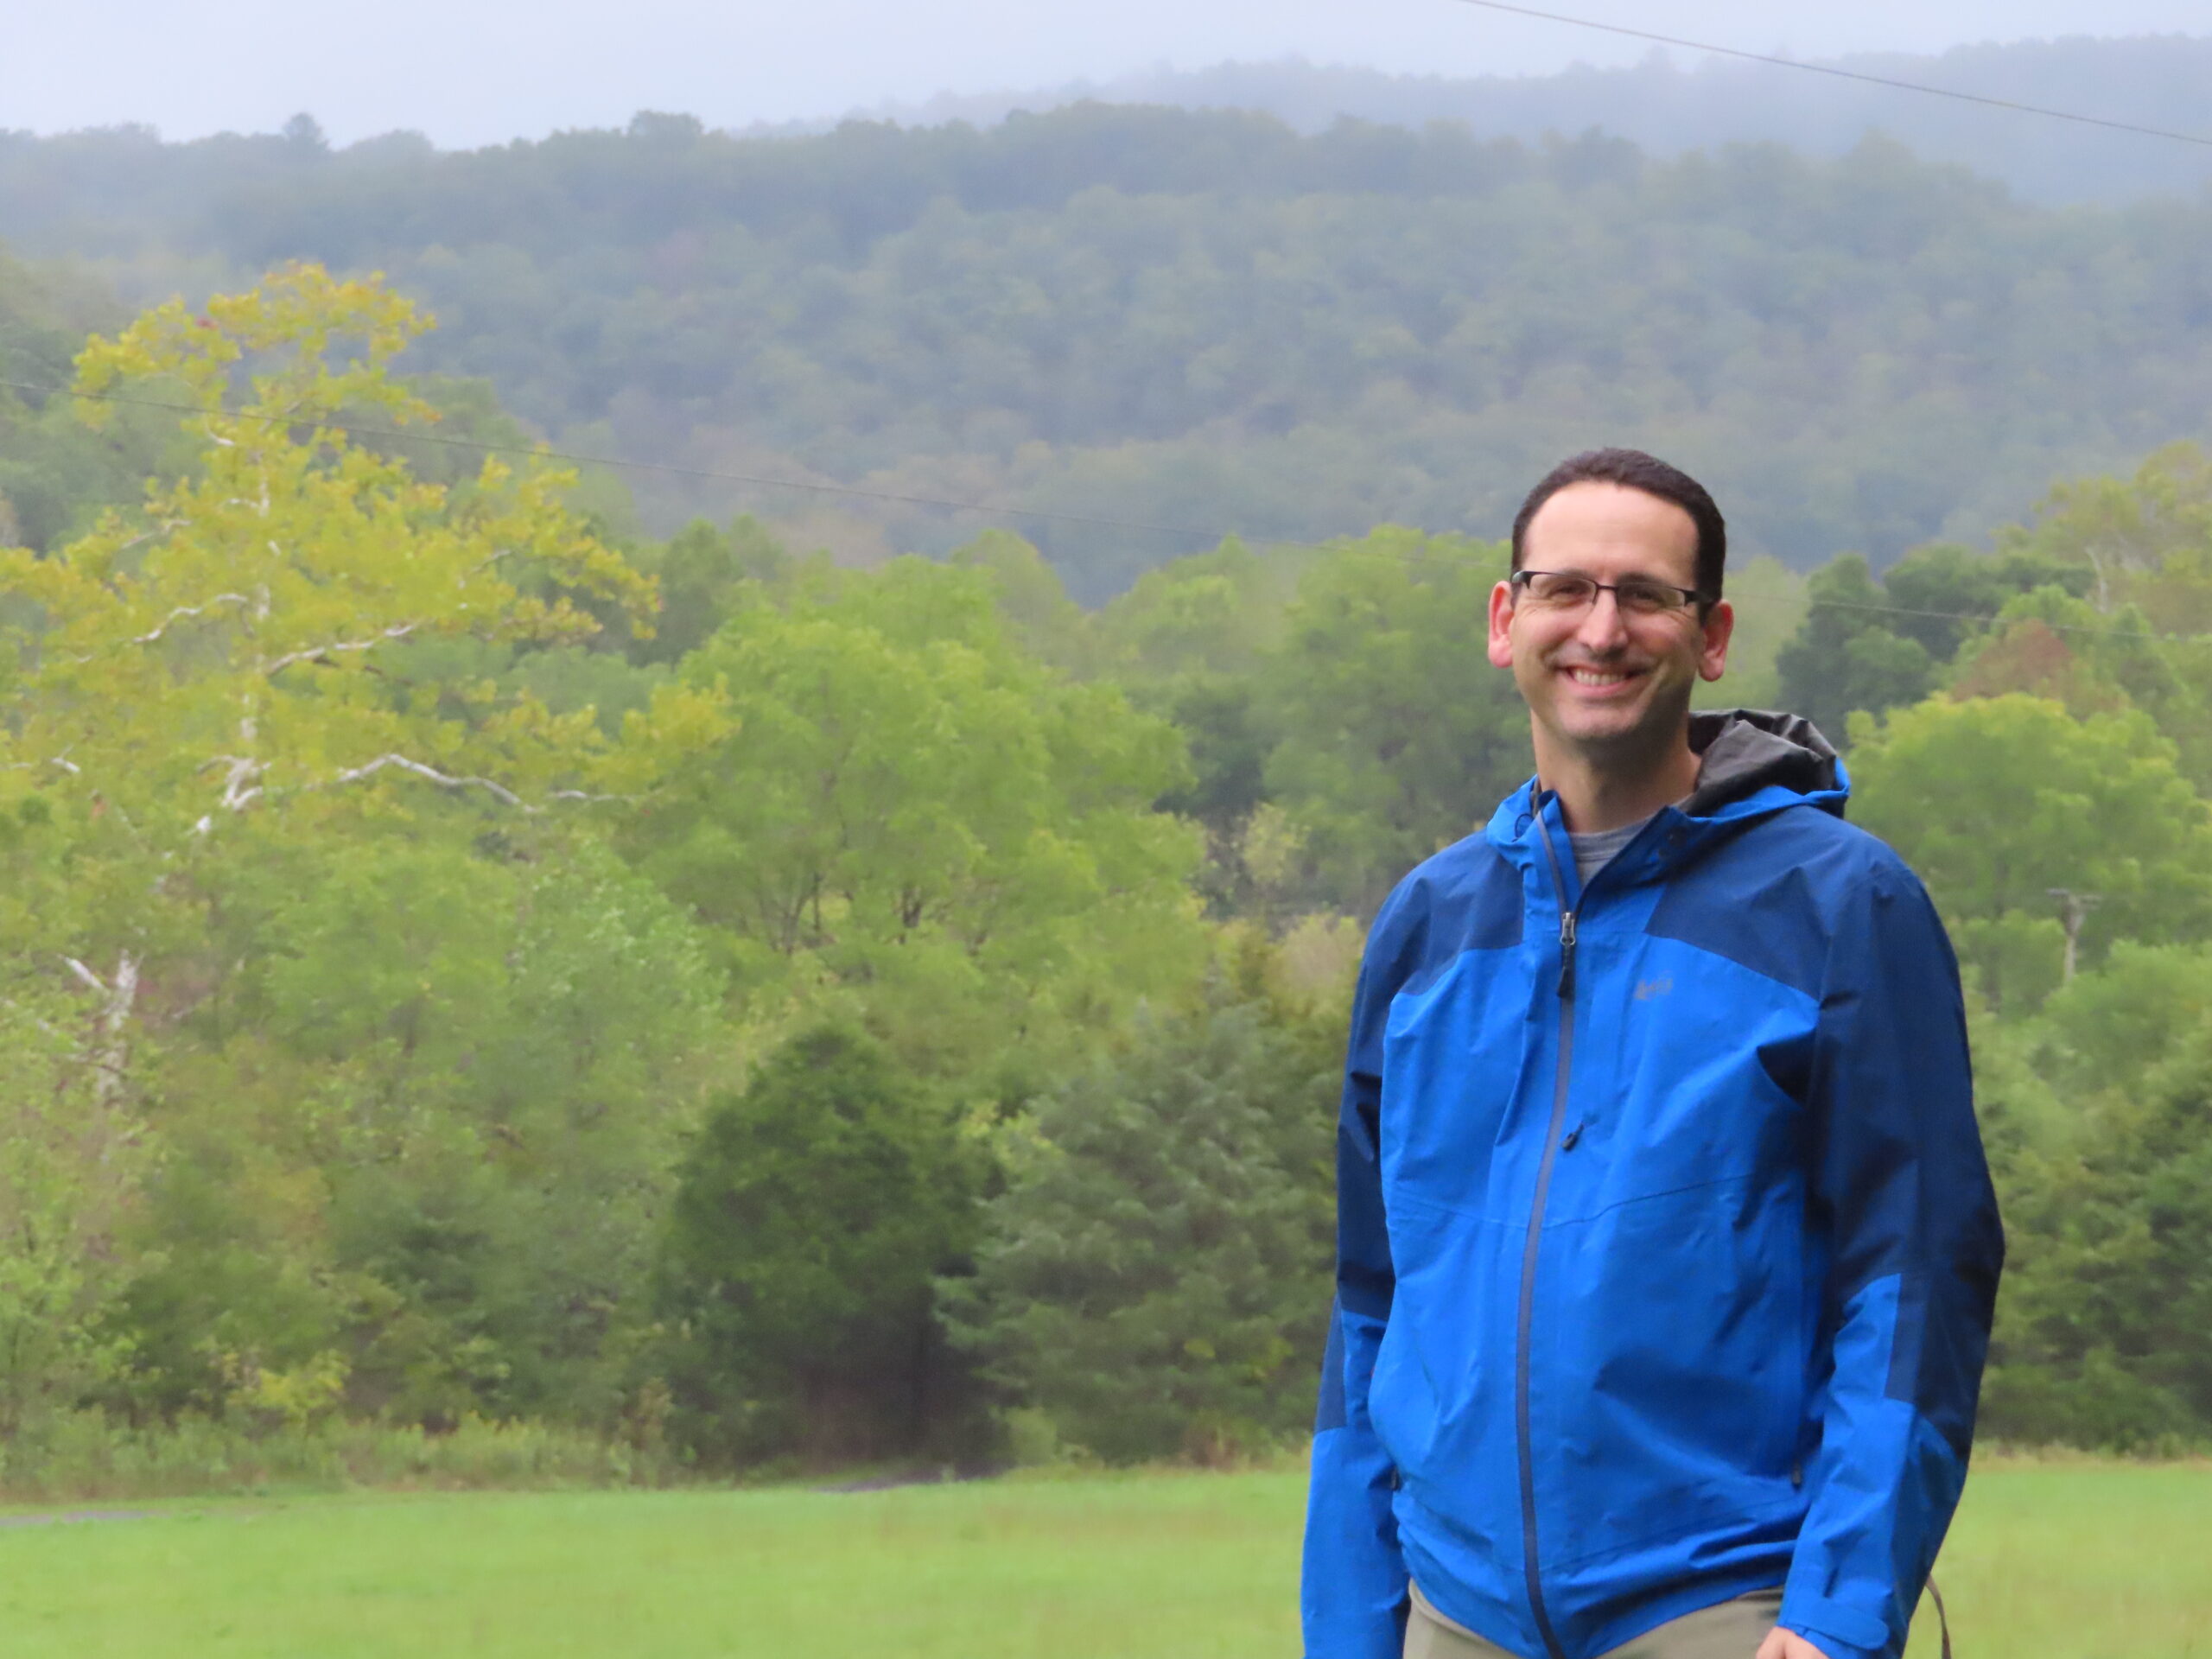 Jeff Fox standing in front of a grass field and forest.